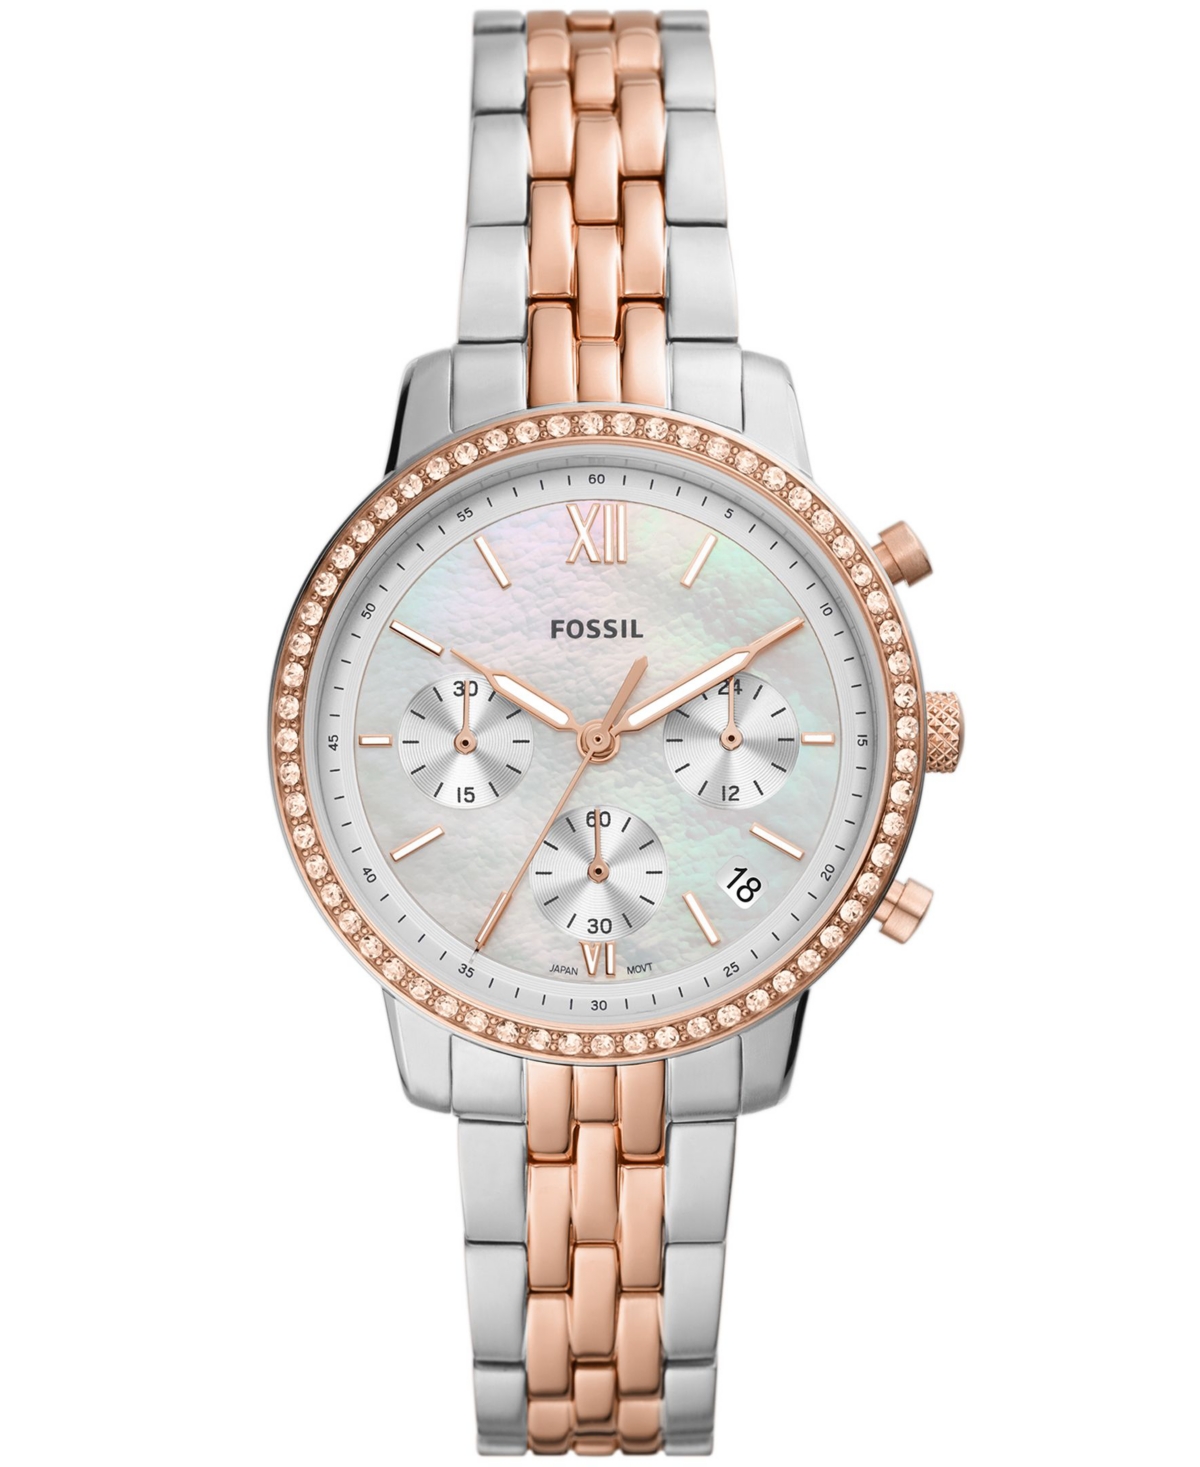 Fossil Women's Neutra Chronograph Two-tone Stainless Steel Watch, 36mm In White/rose Gold